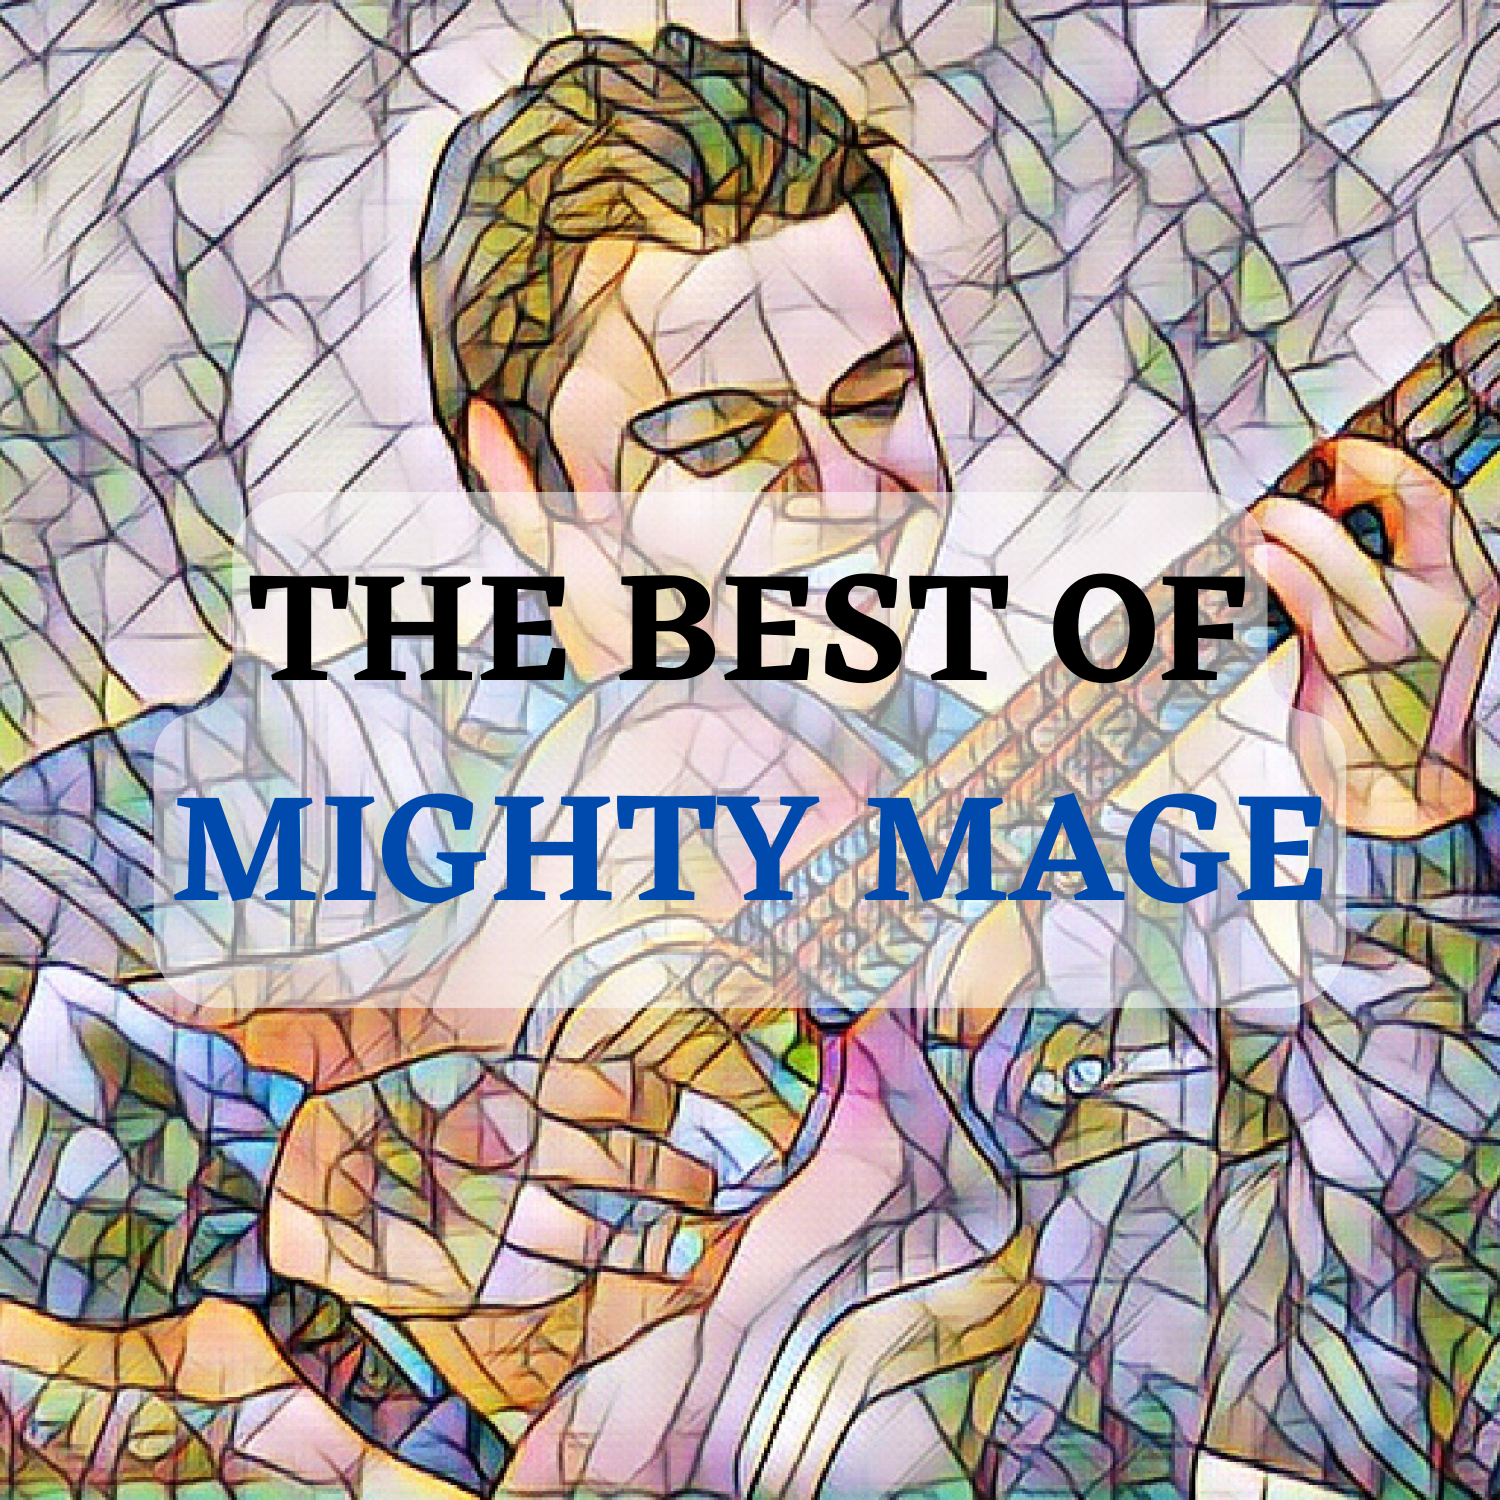 Sharing his undertreated love for music, ‘Mighty Mage’ releases ‘The Best Of Mighty Mage’